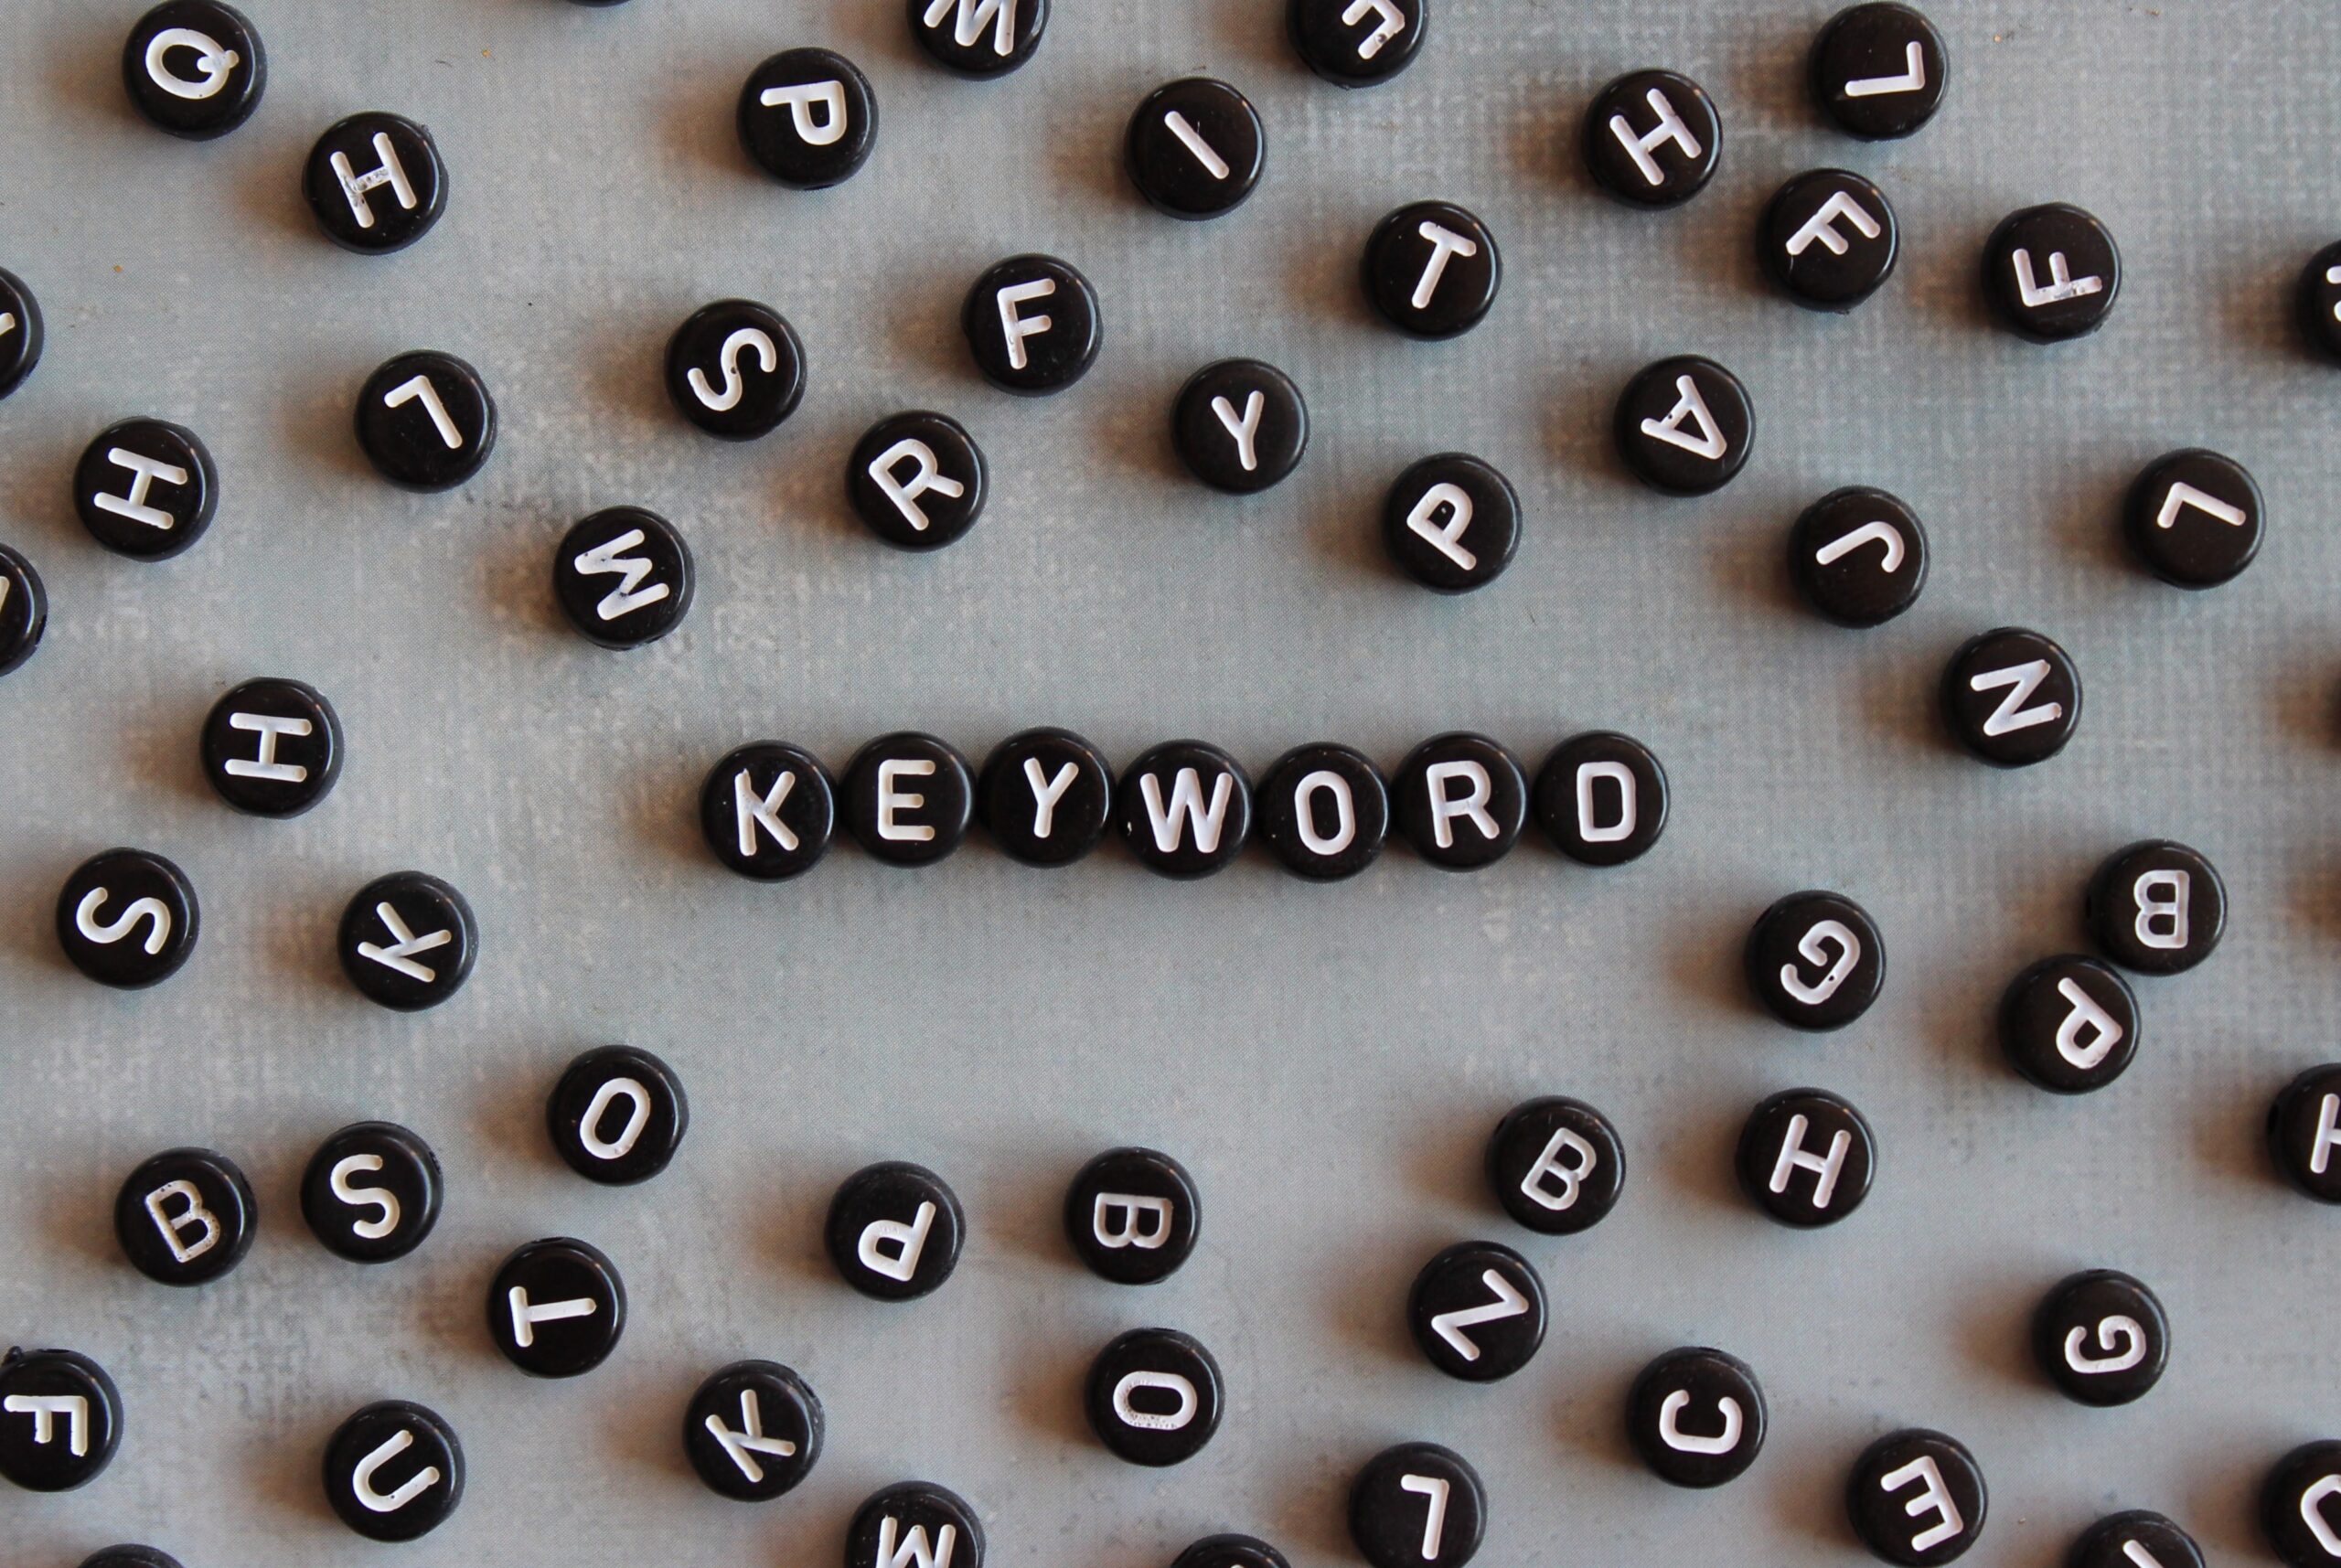 A Comprehensive Guide To Selecting The Right Keywords For Your PPC Campaigns